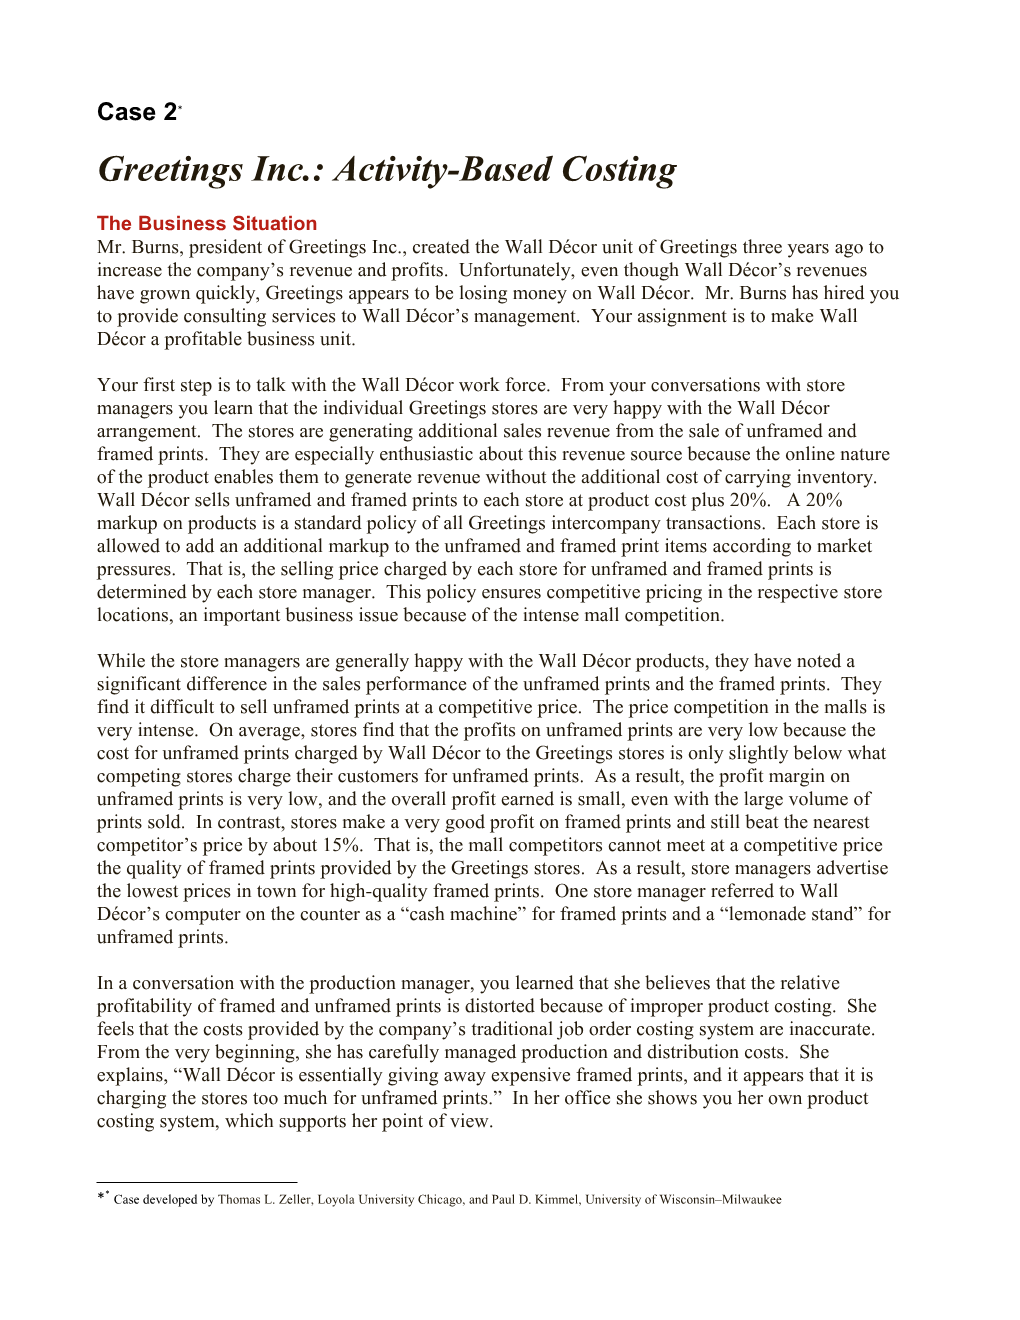 Greetings Inc.: Activity-Based Costing